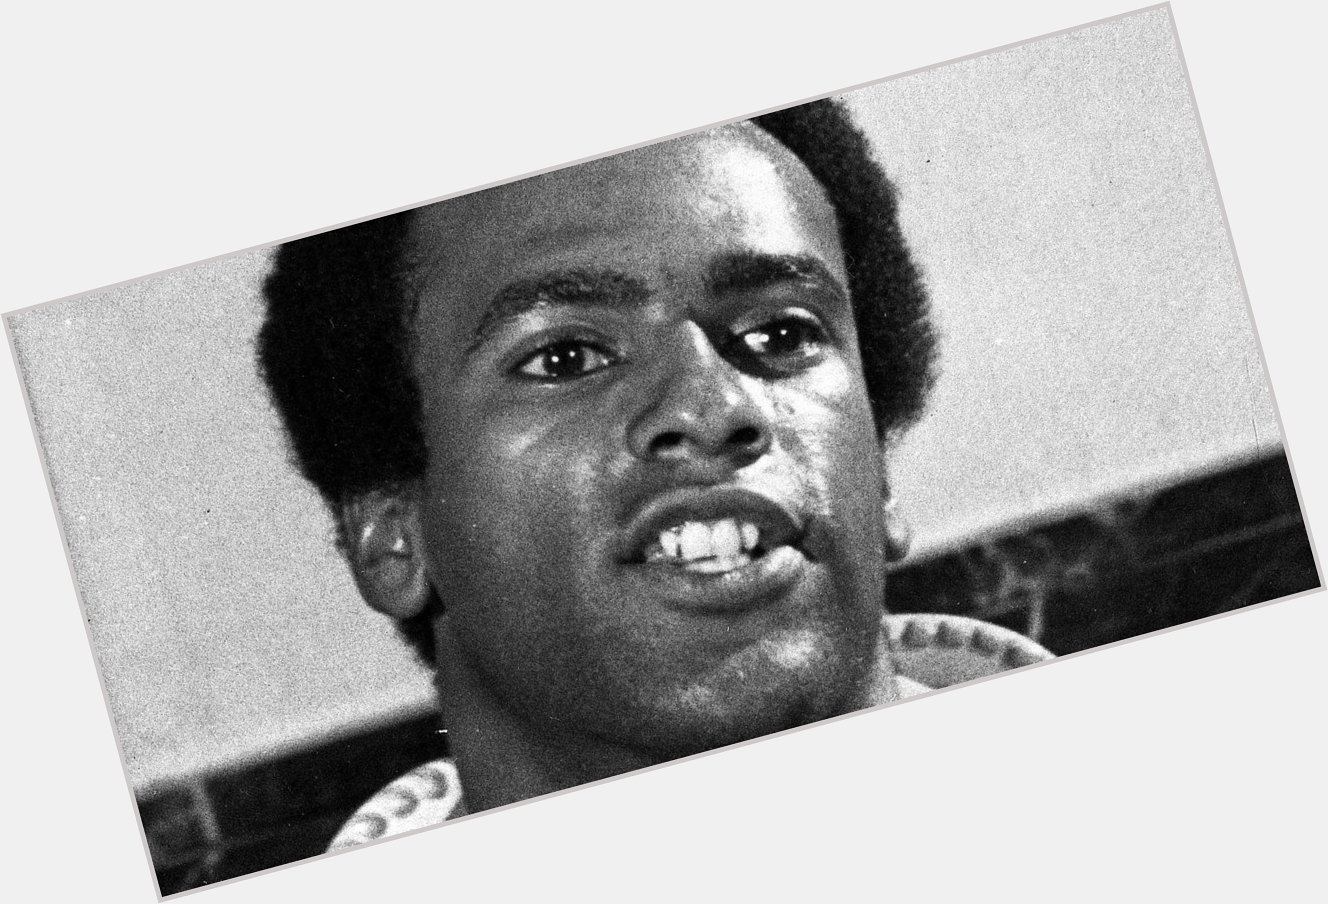 Happy Birthday \" Black Panther Part co-founder Huey P. Newton was born February 17th, 1942 